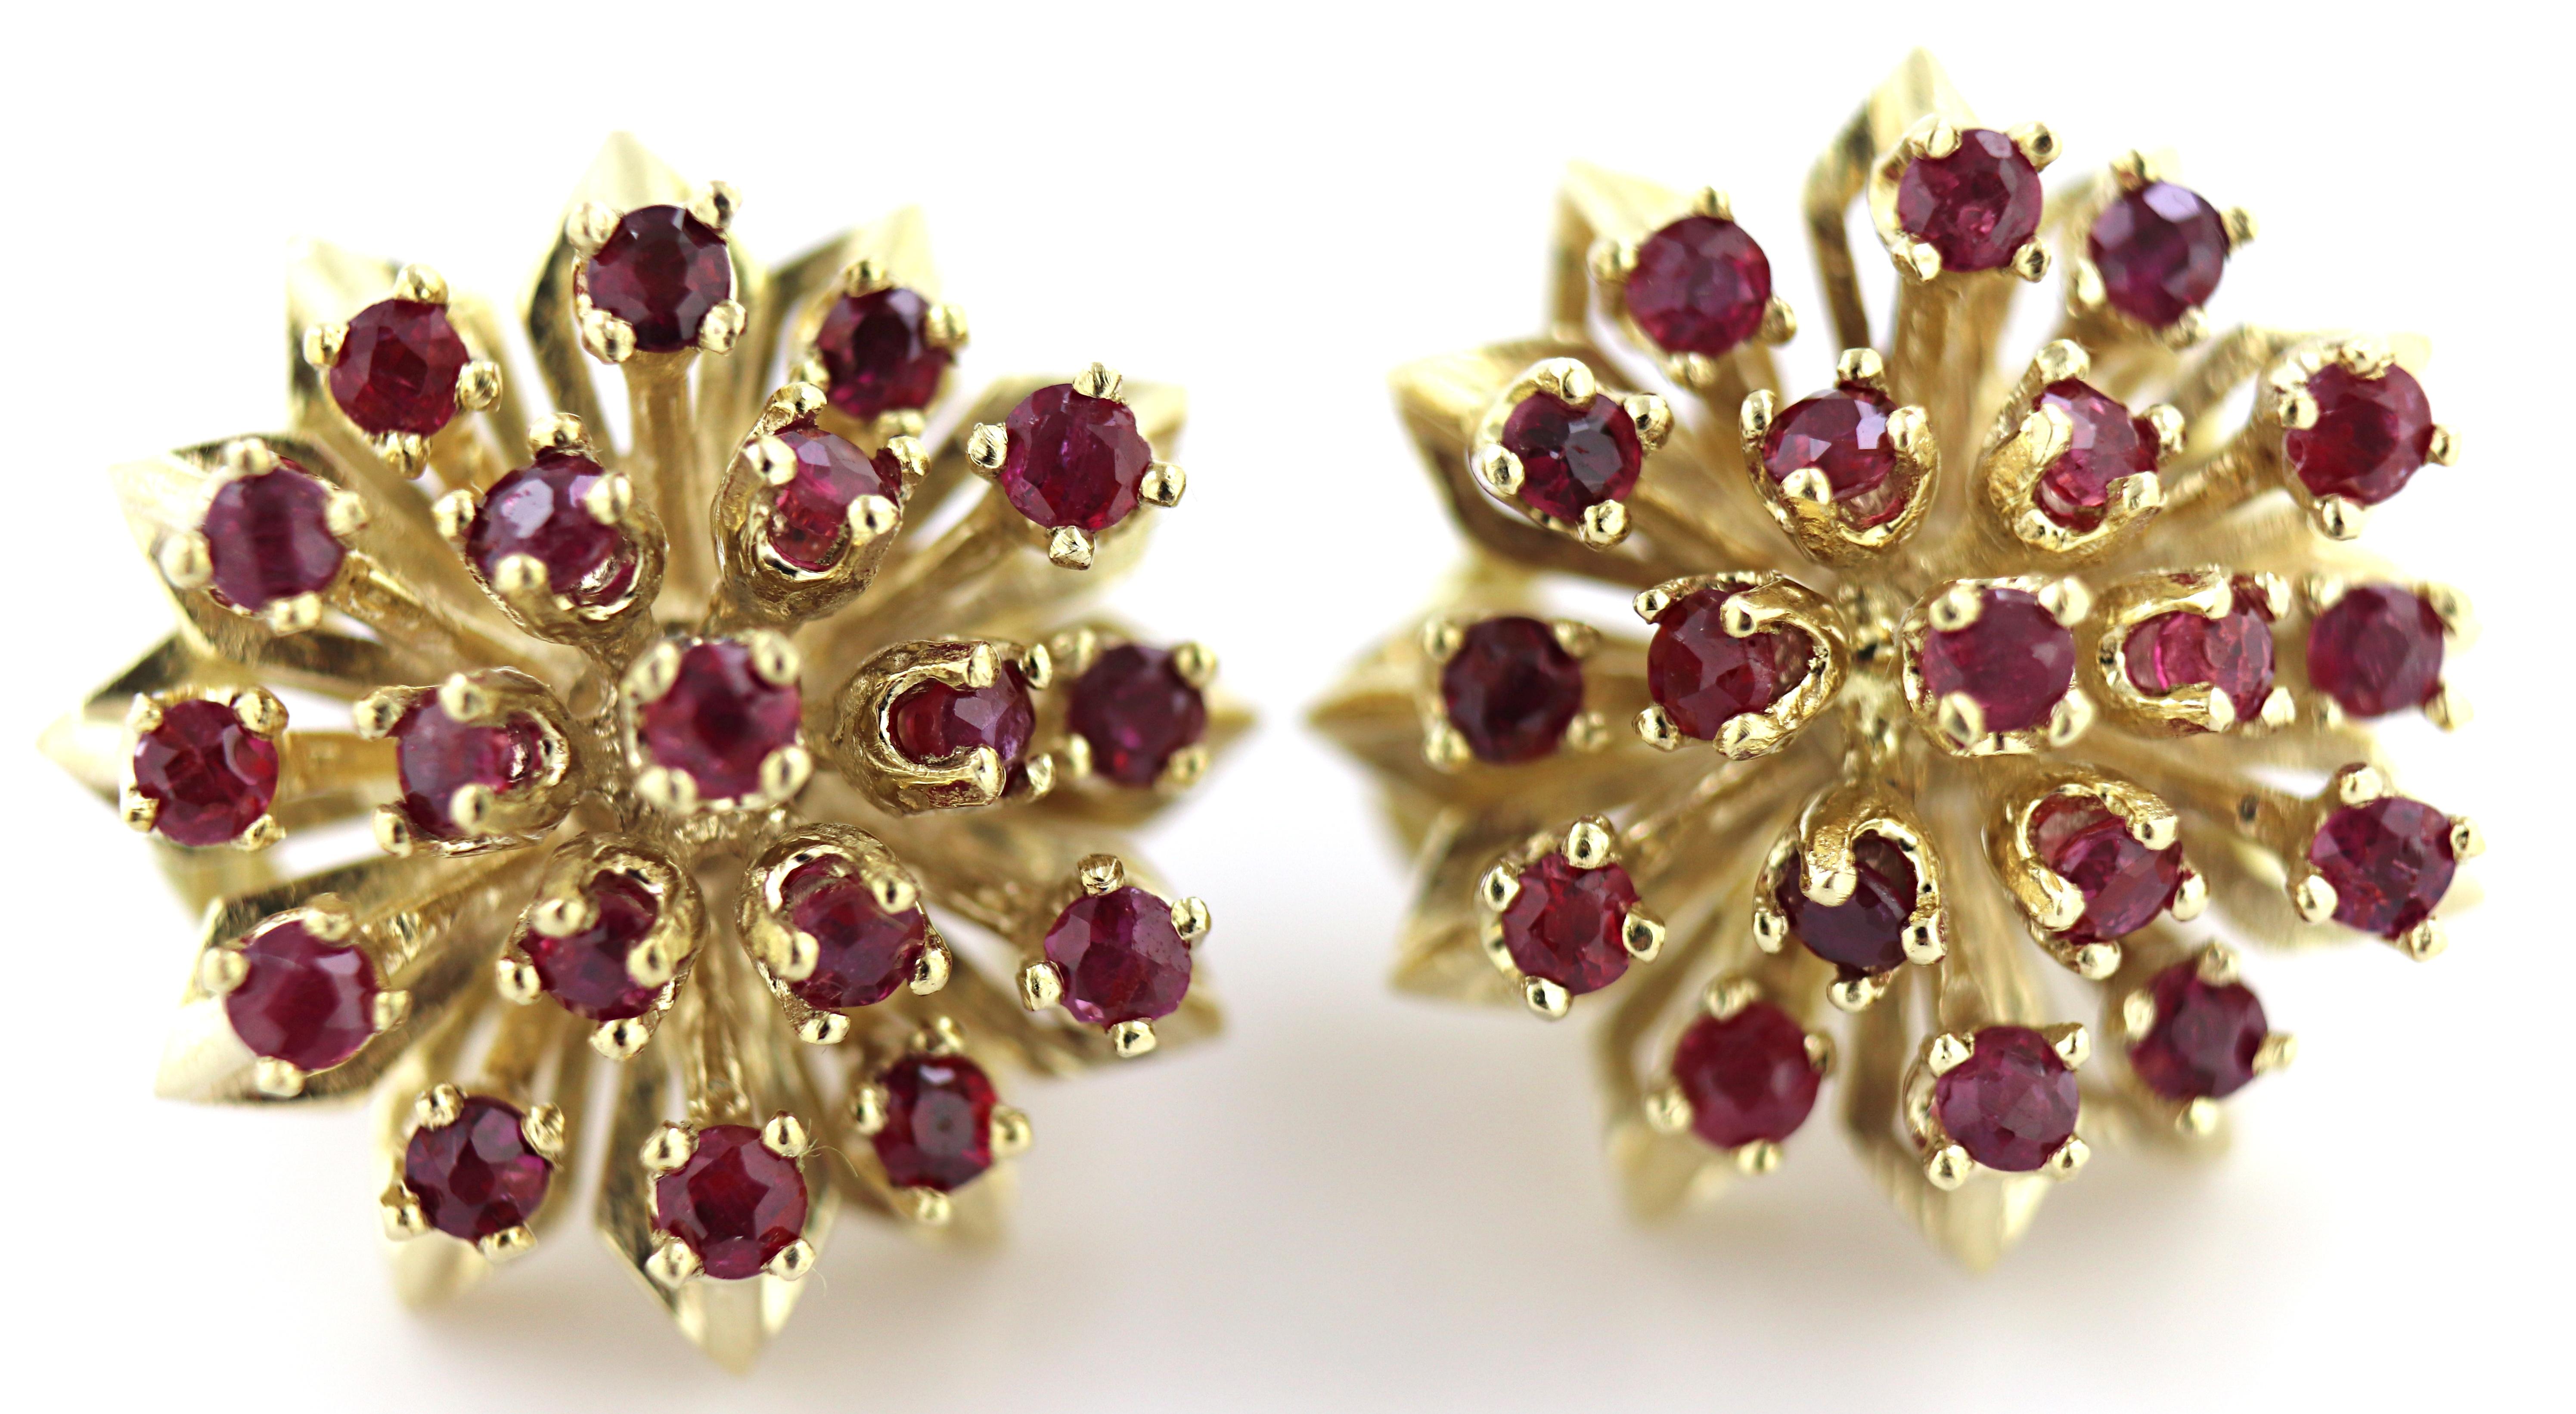 Featuring (38) round-cut rubies, 1.00 ct. tw., set in 14k yellow gold flower mountings, 18 mm, completed
by post and omega backs, marked 14ct., Gross weight 12.14 grams.